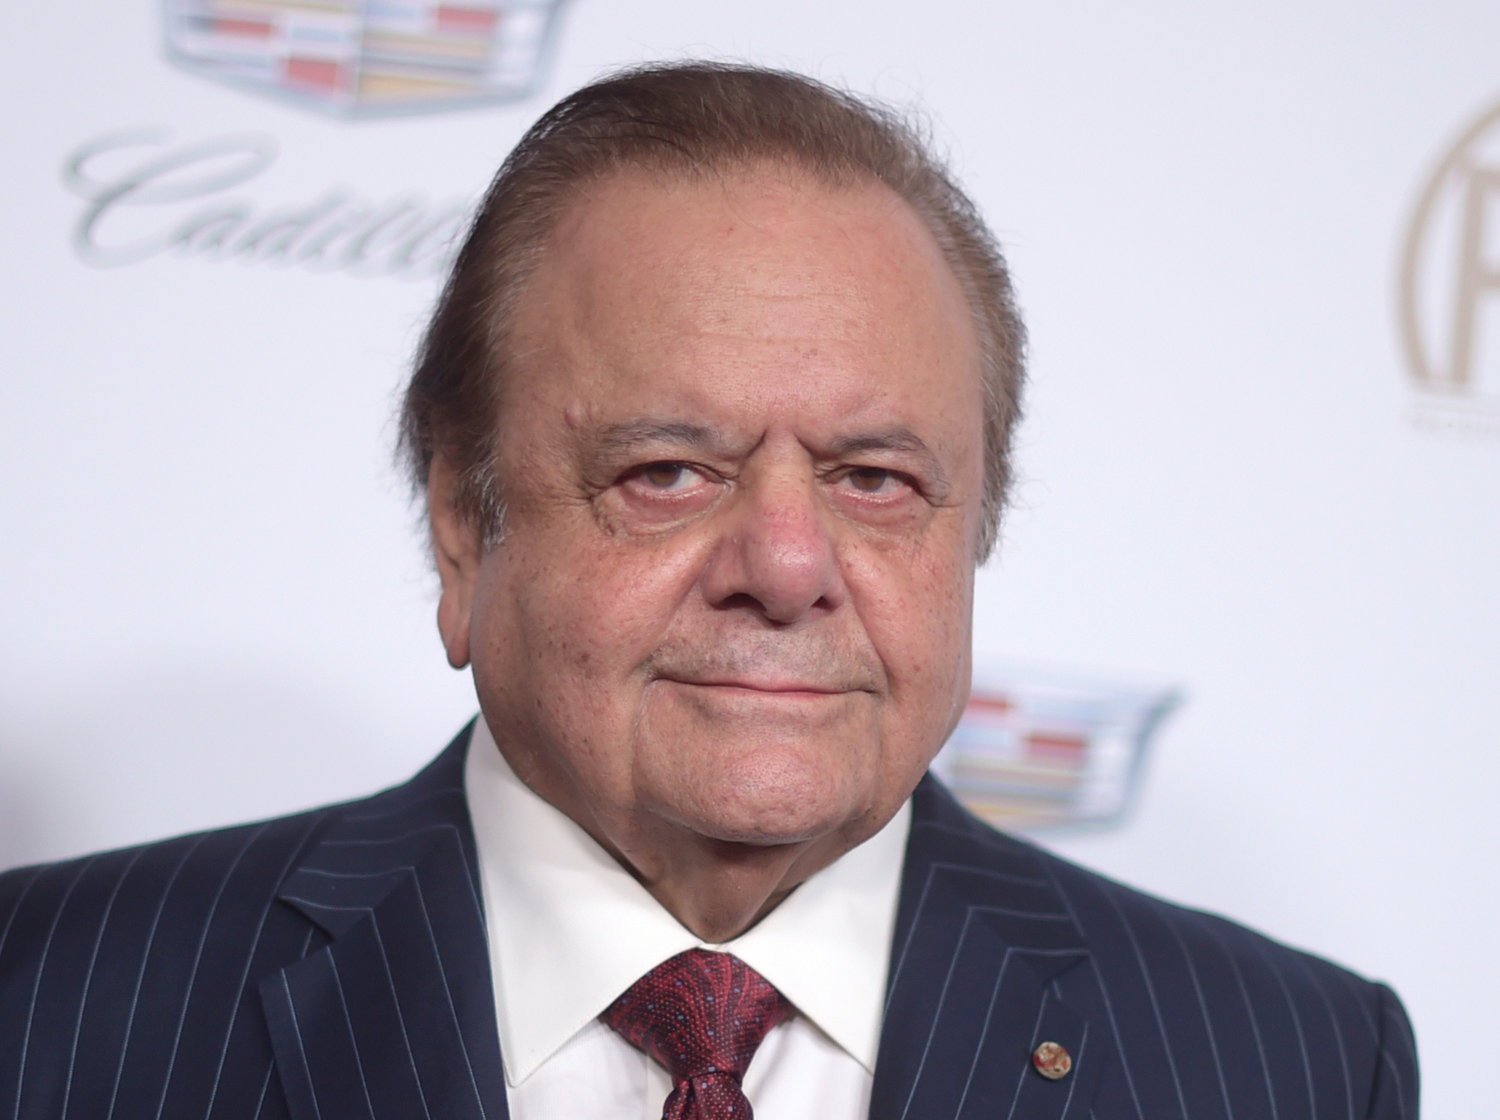 FILE - Paul Sorvino arrives at the 29th annual Producers Guild Awards at the Beverly Hilton on Saturday, Jan. 20, 2018, in Beverly Hills, Calif. Sorvino, an imposing actor who specialized in playing crooks and cops like Paulie Cicero in ‚ÄúGoodfellas‚Äù and the NYPD sergeant Phil Cerretta on ‚ÄúLaw &amp; Order,‚Äù has died. He was 83.  (Photo by Richard Shotwell/Invision/AP, File)